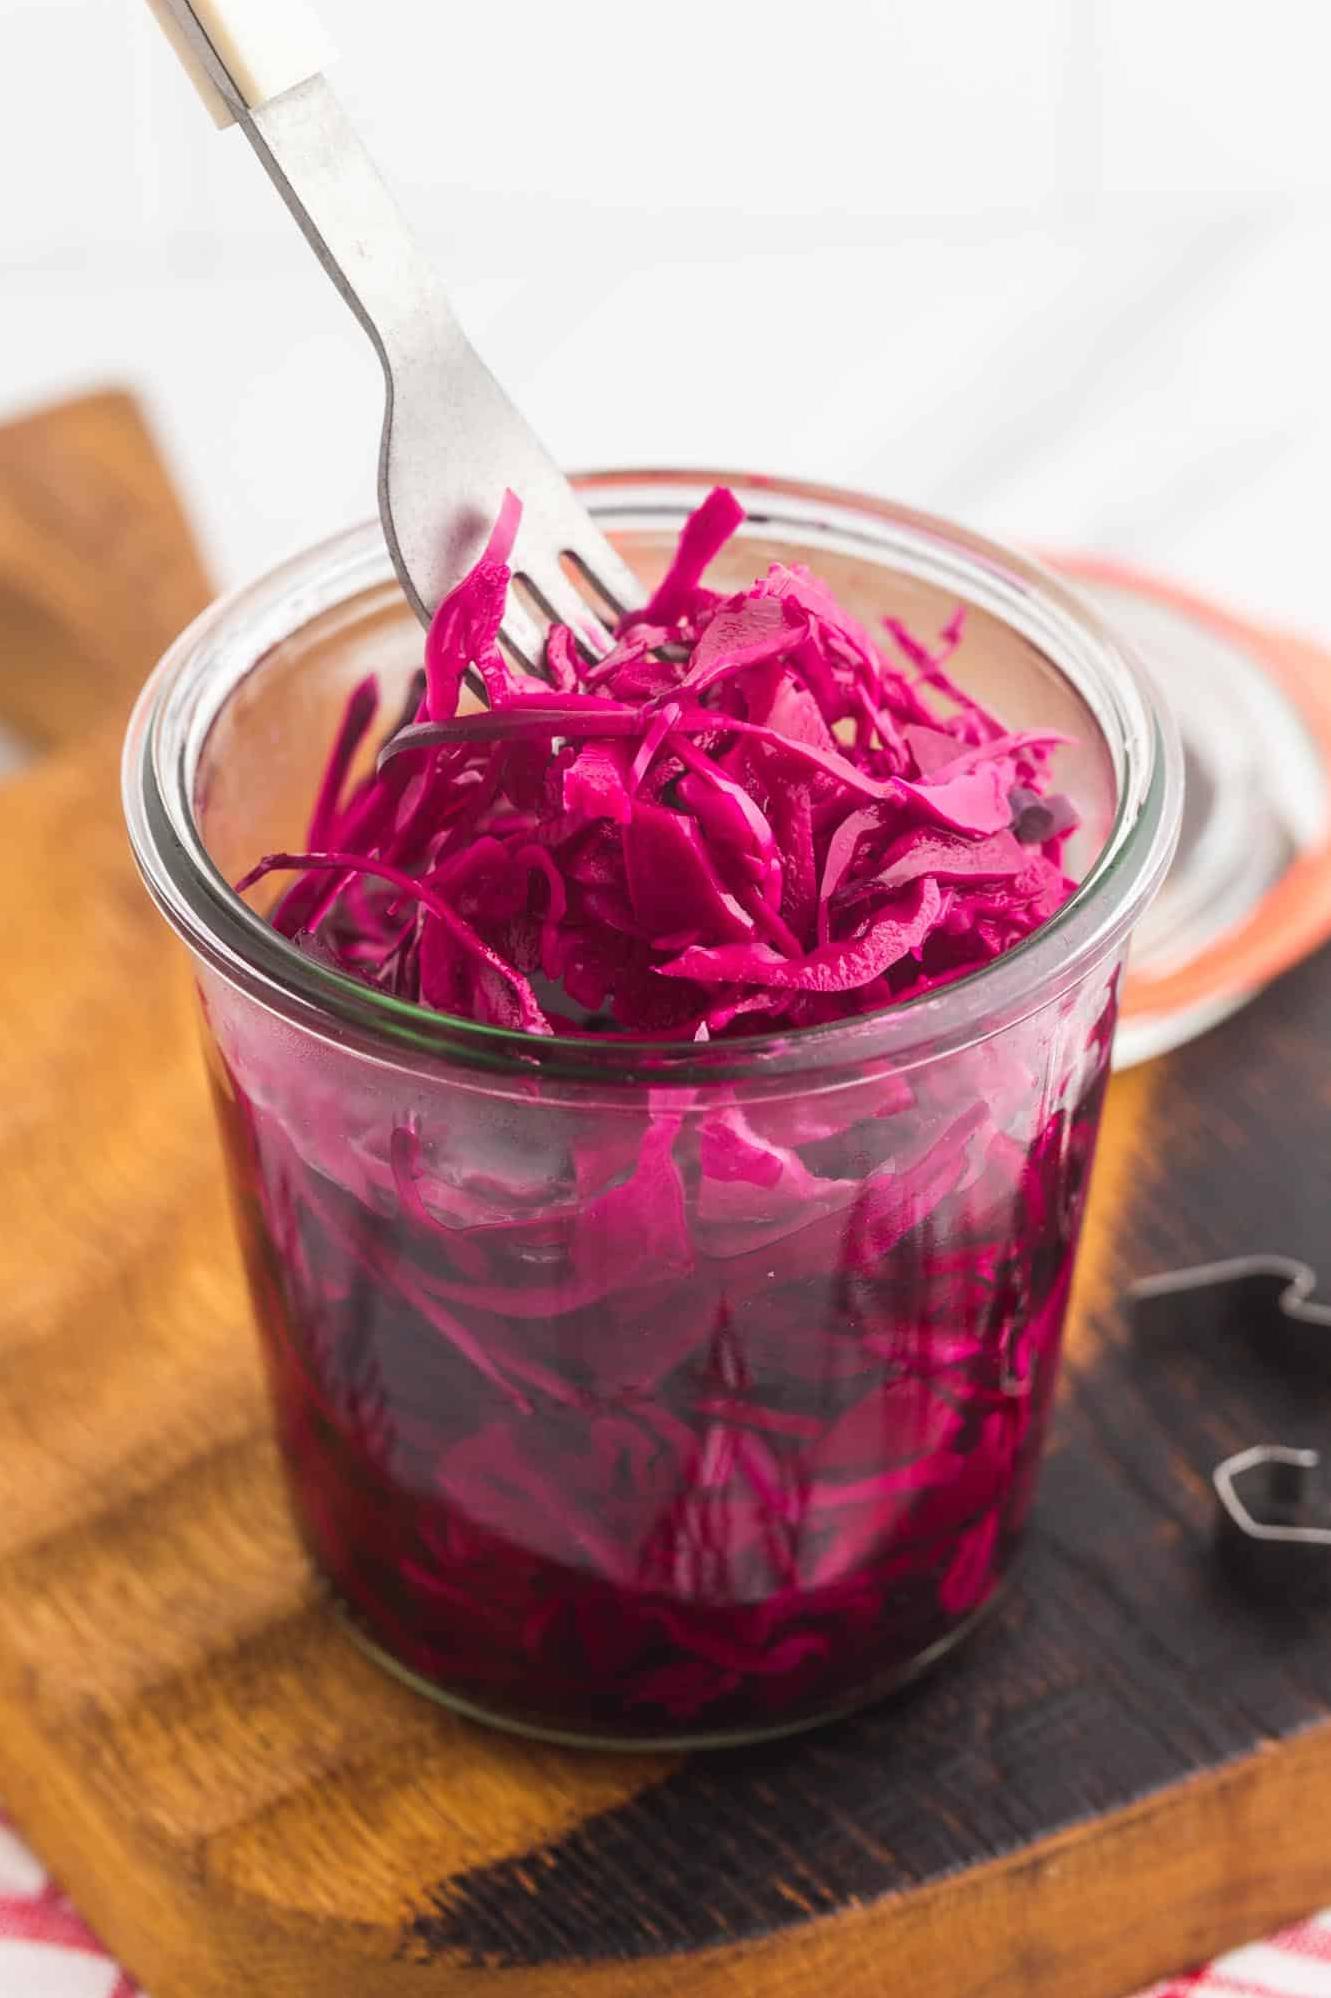  This bright pickled red cabbage adds a pop of color and flavor to any dish.